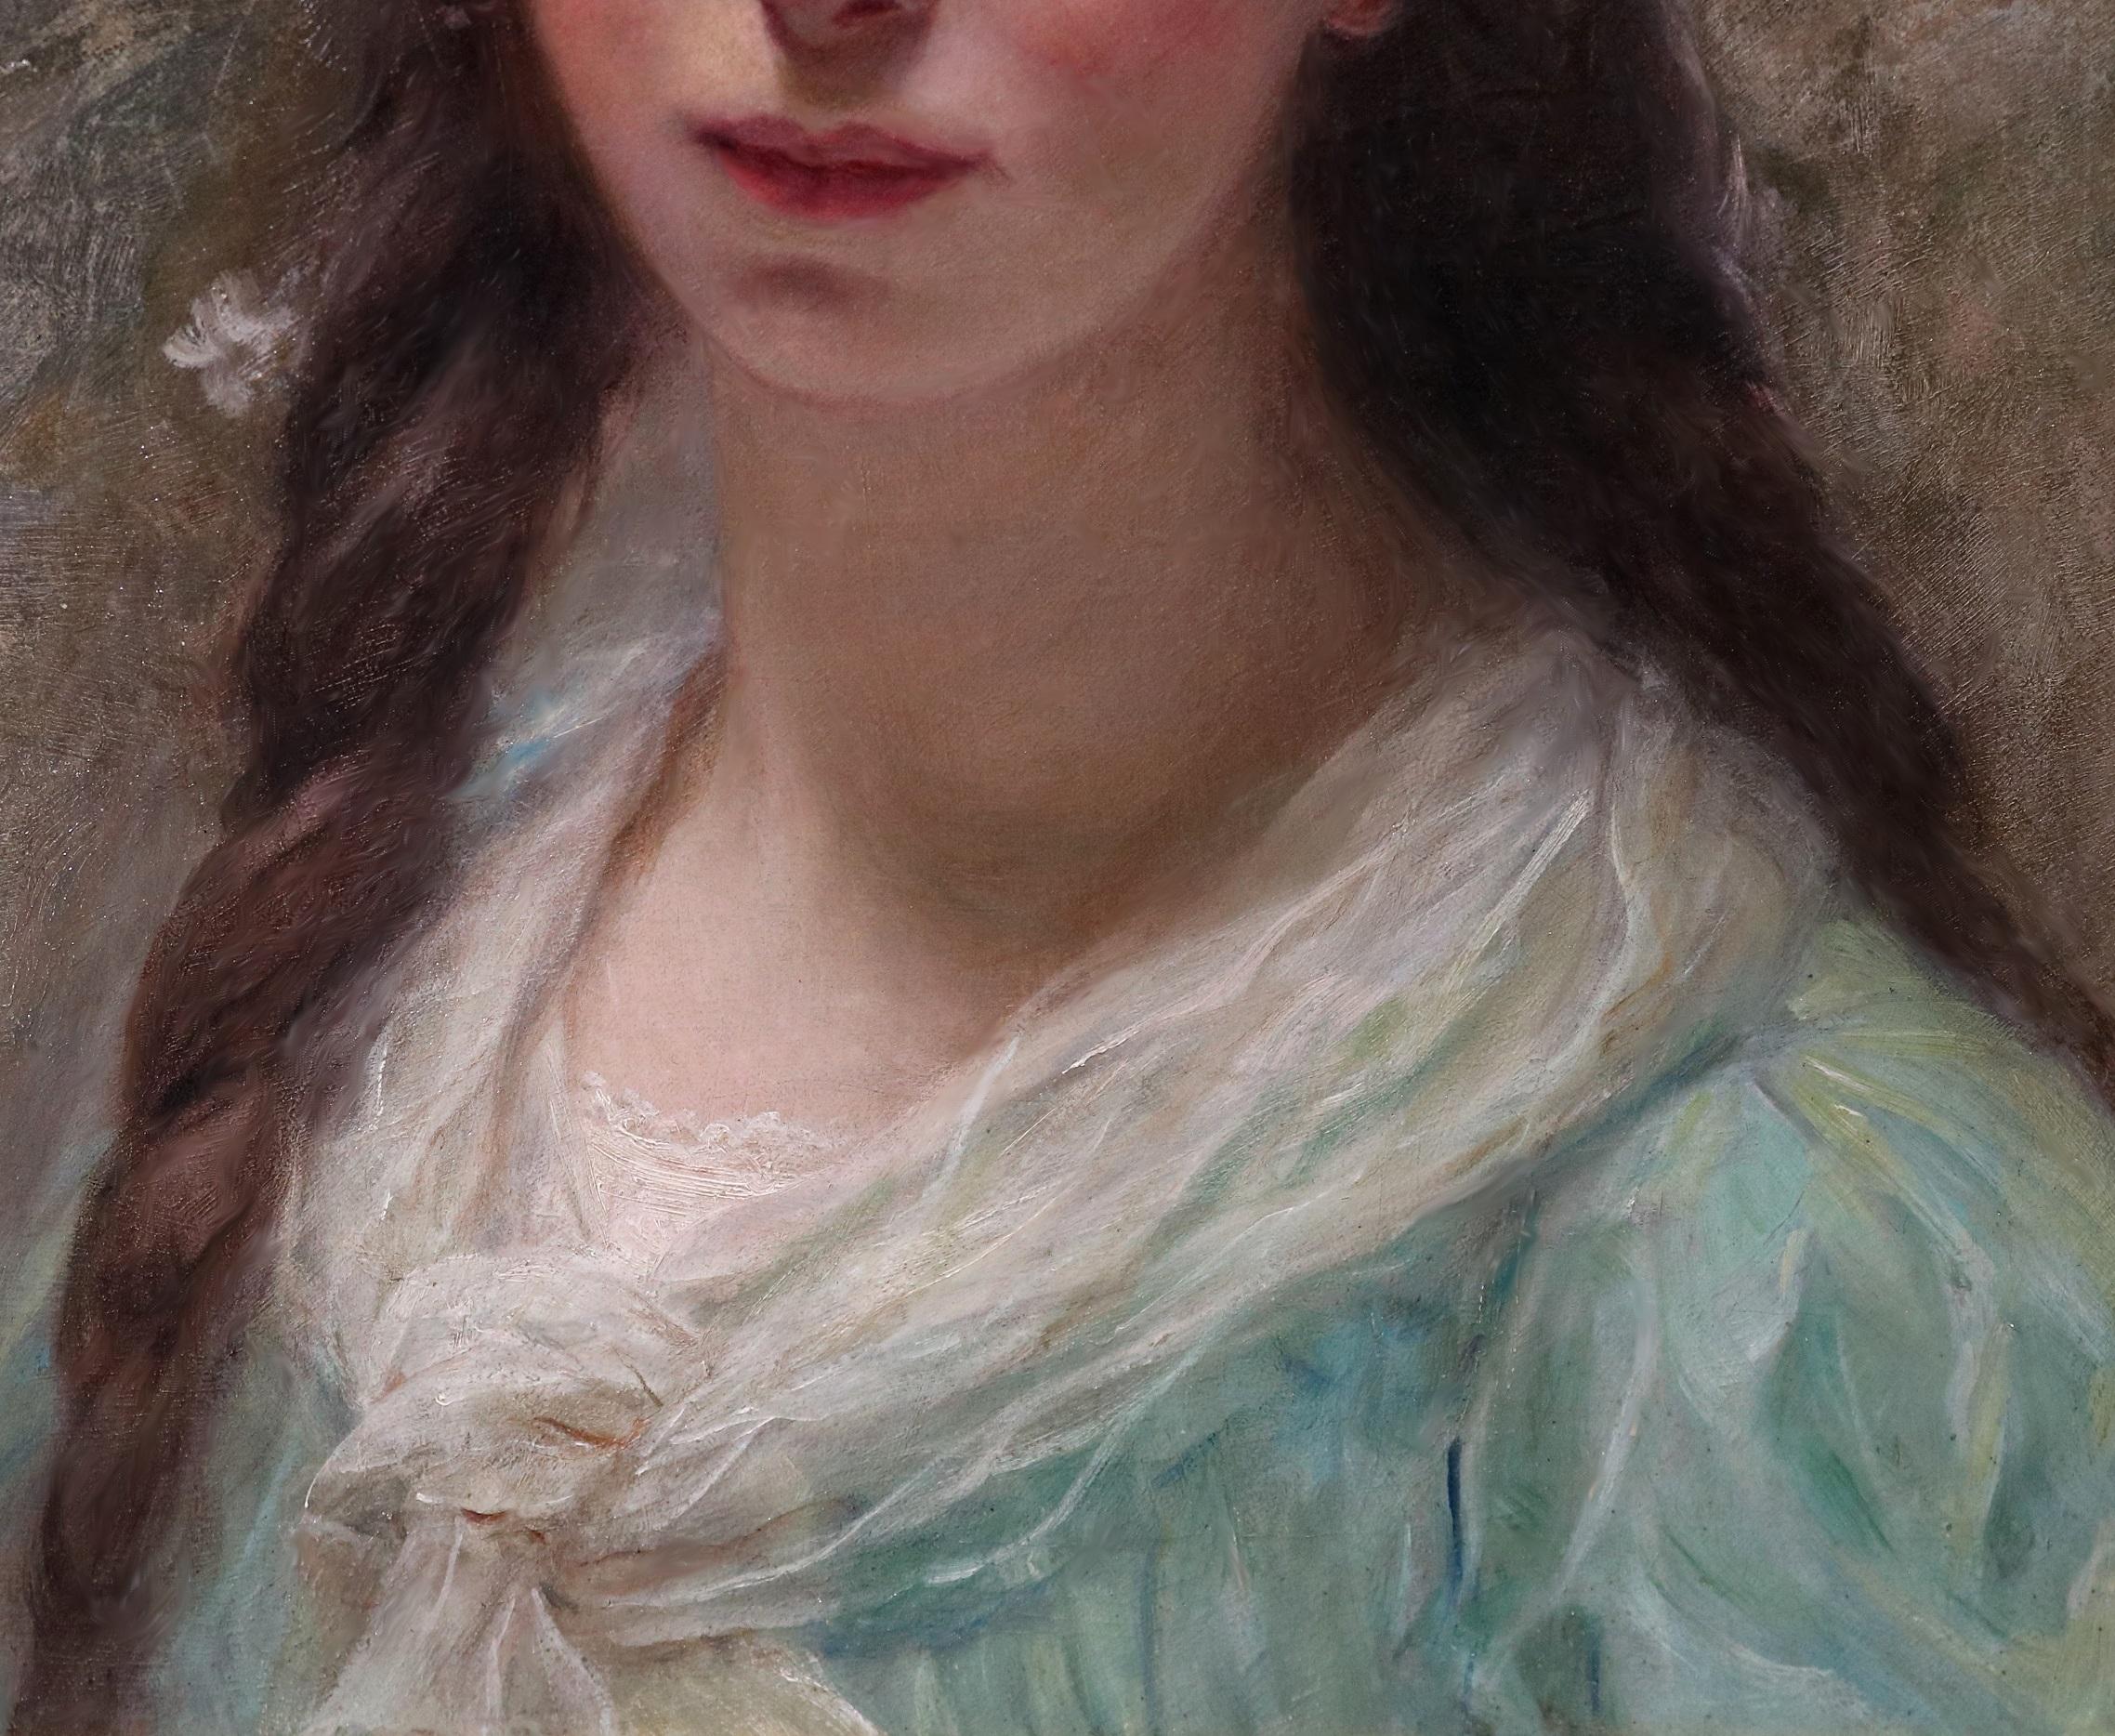 ‘La Couronne de Marguerite’ by Édouard-Louis-Lucien Cabane (1857-1942). 

The painting – which depicts a young French beauty wearing a crown of daisies – is signed by the artist and dated 1915. It hangs in a fine quality gold metal leaf